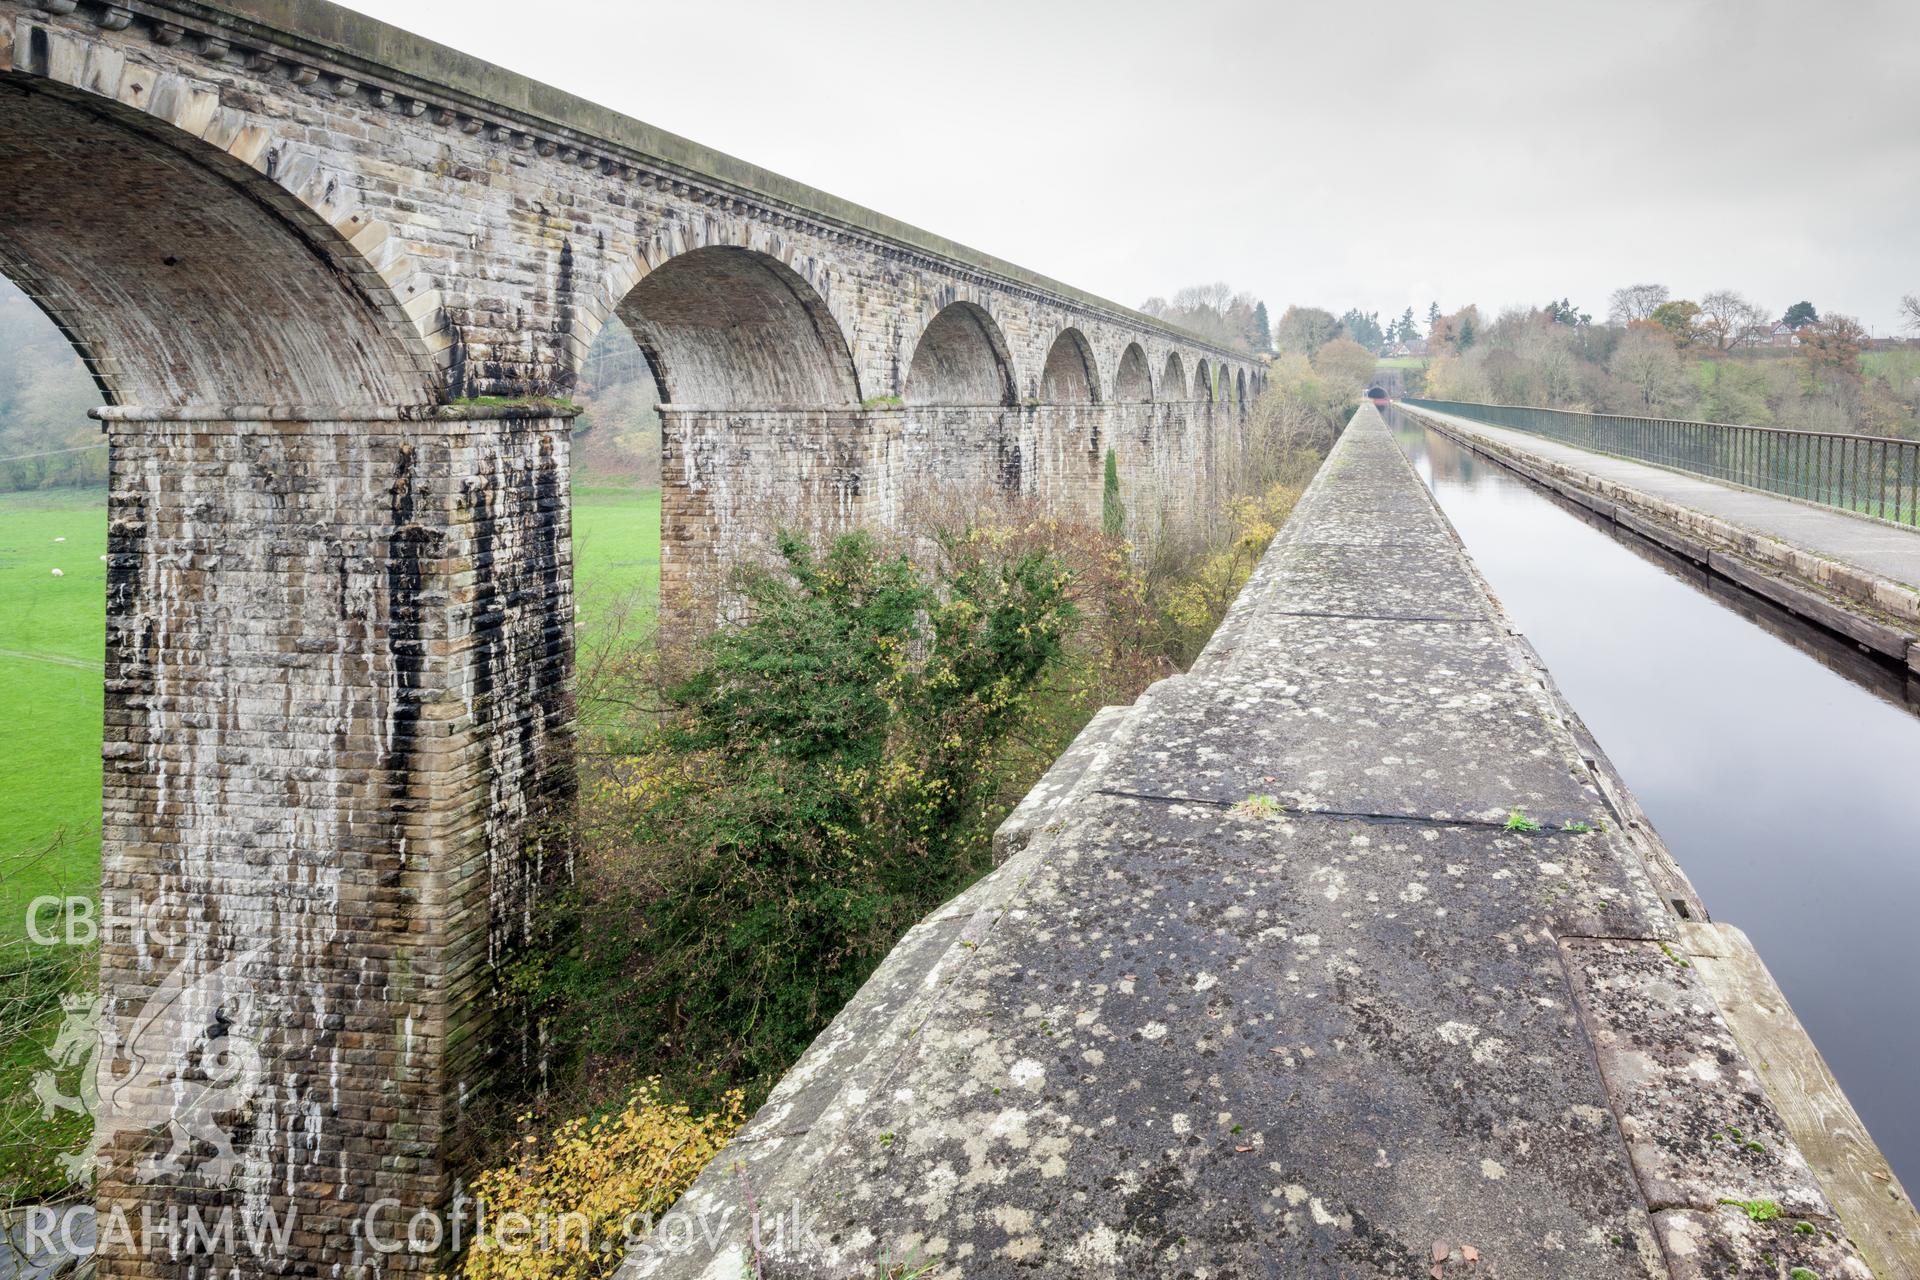 Railway viaduct viewed from the canal aqueduct, looking north northwest